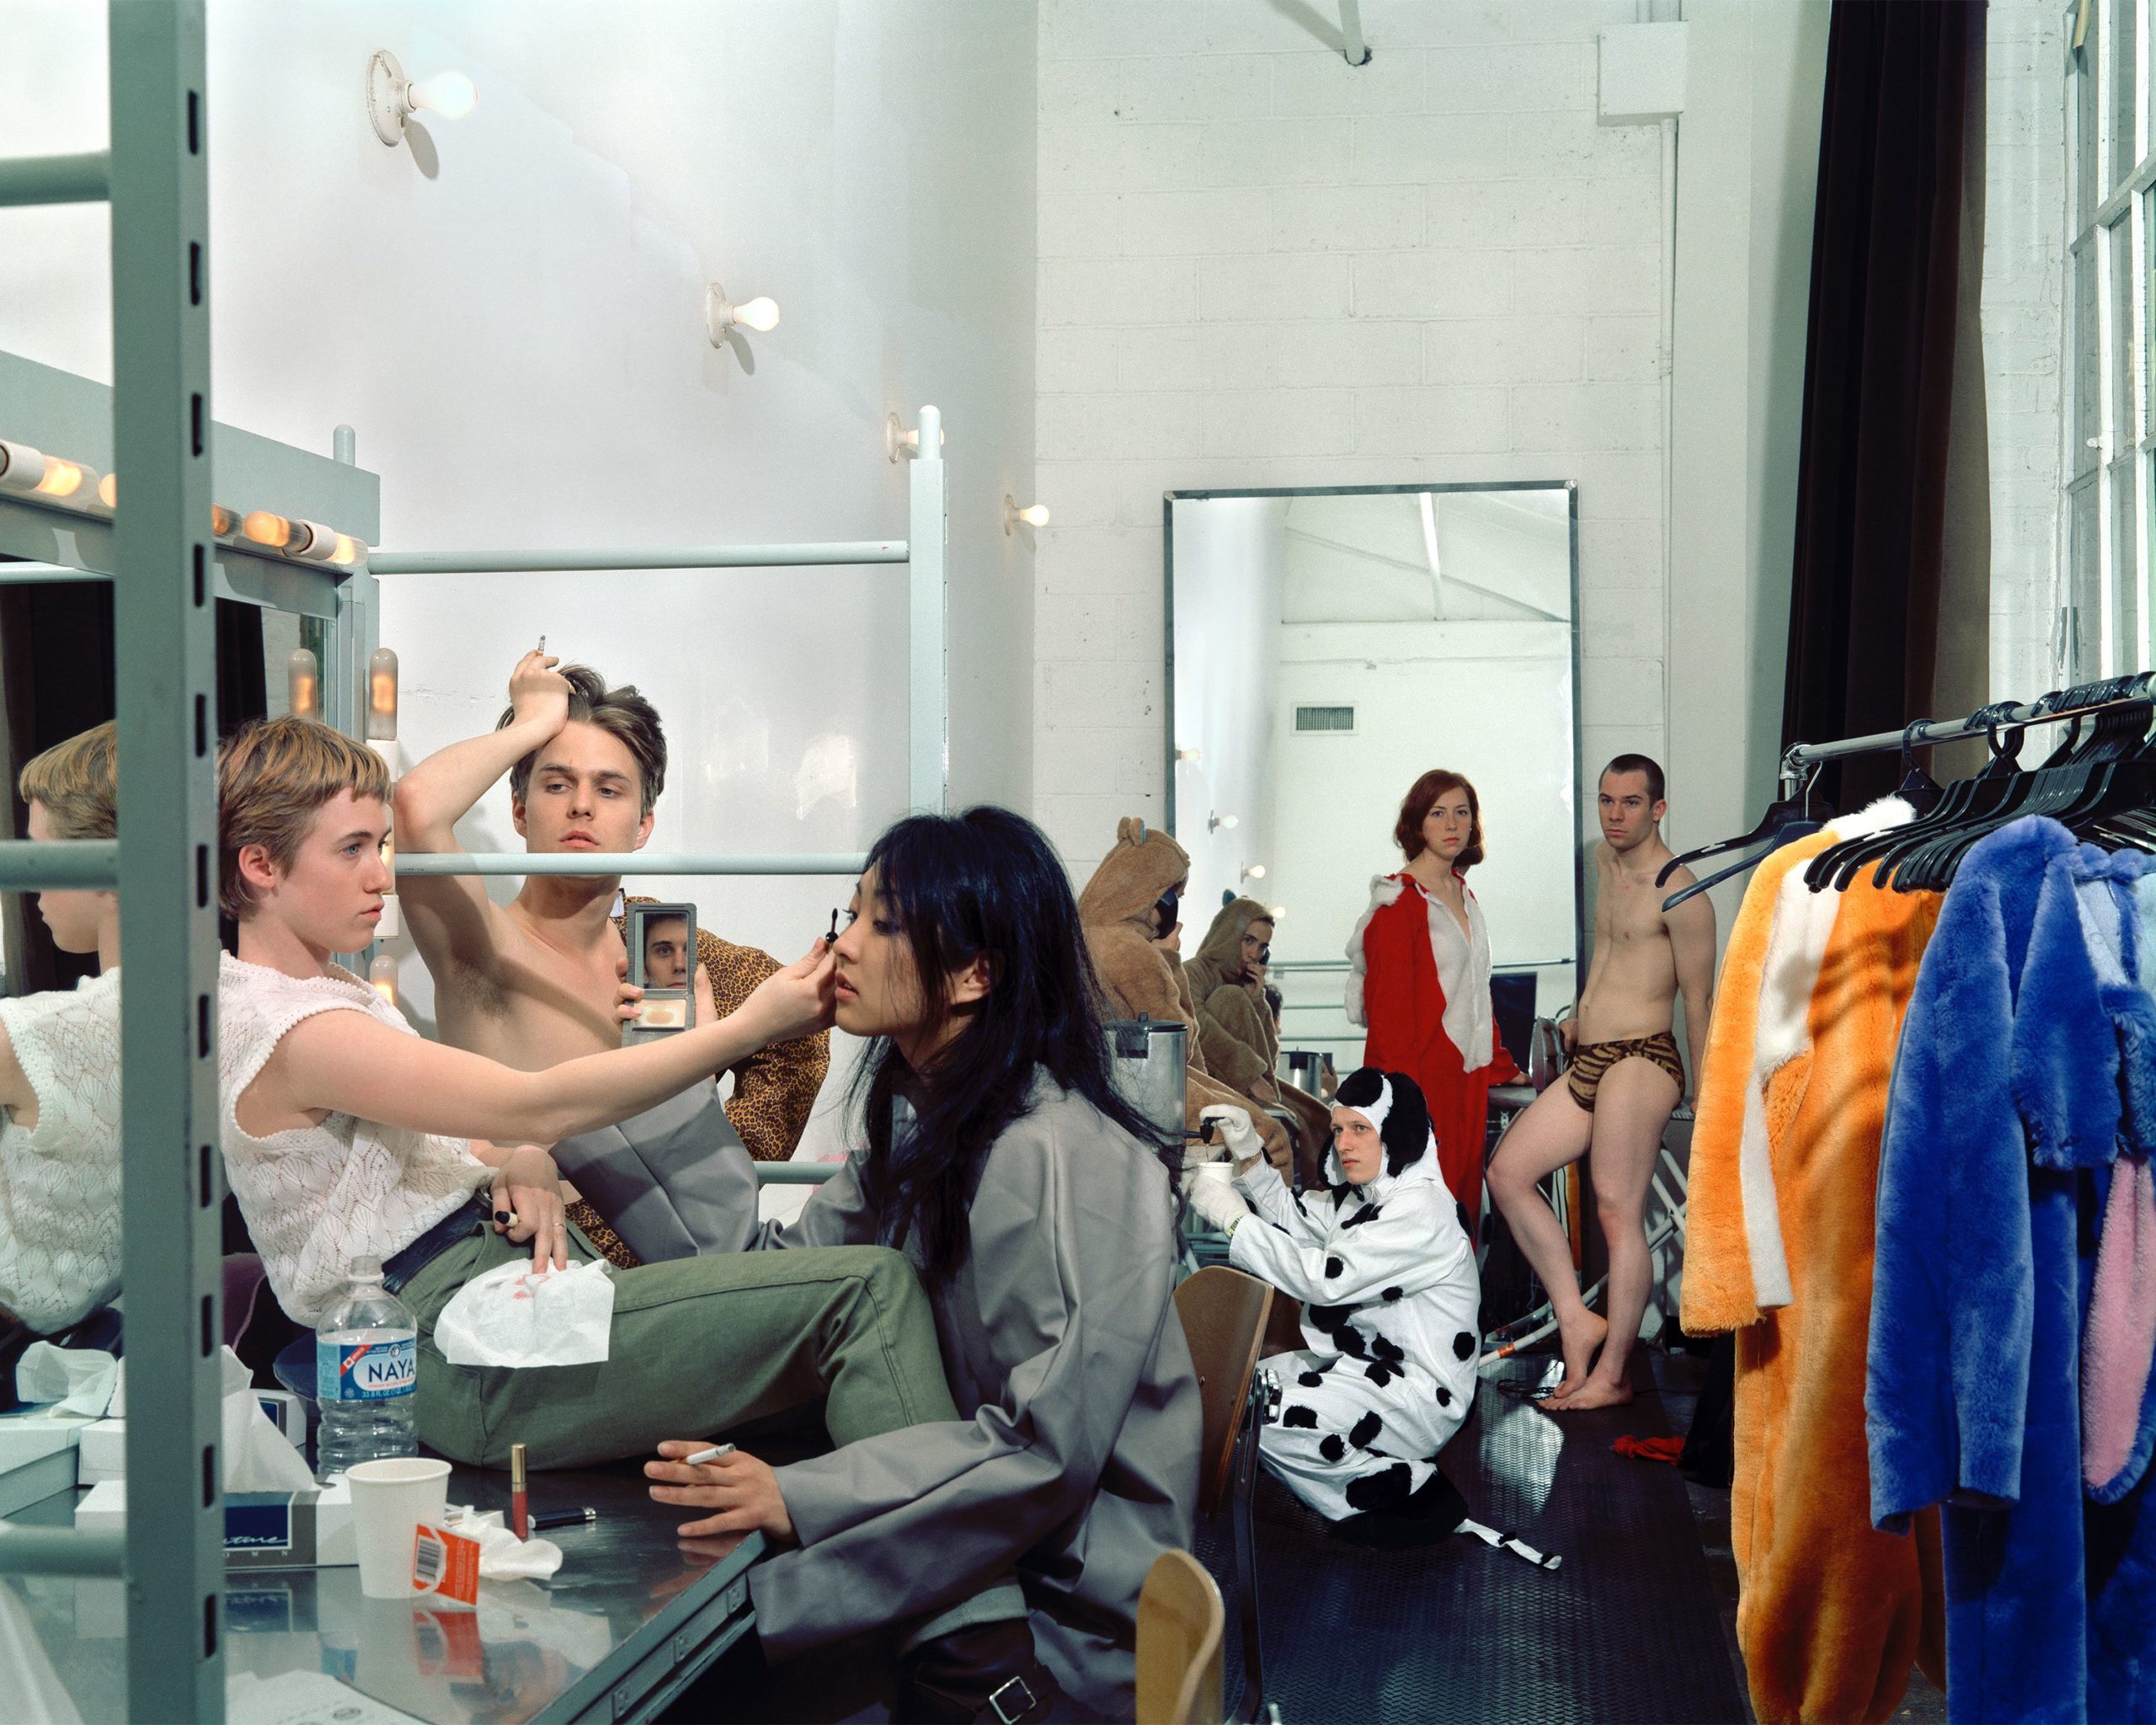 7 people stand in a makeup or dressing studio. Two women at the forefront appear to be applying makeup, with one of the women staring at her reflection by the mirror provided by her counterpart. A man watches behind them. Four figures in the background dress in animal suits, self-consciously looking towards the camera.